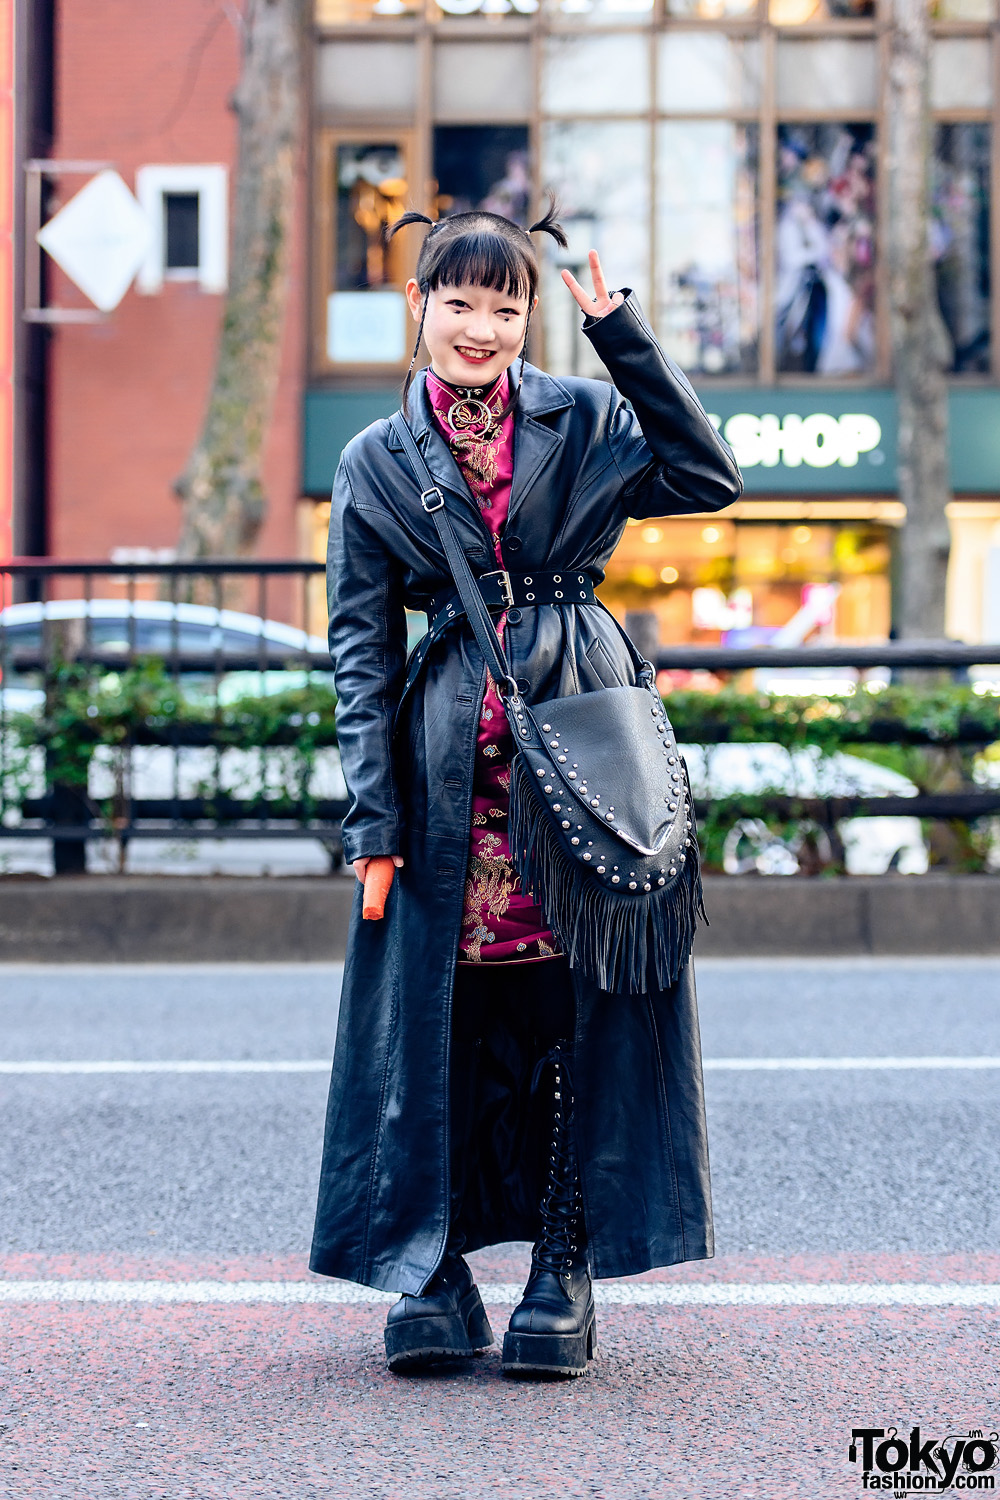 Japanese fashion is so free': The best street style at Tokyo